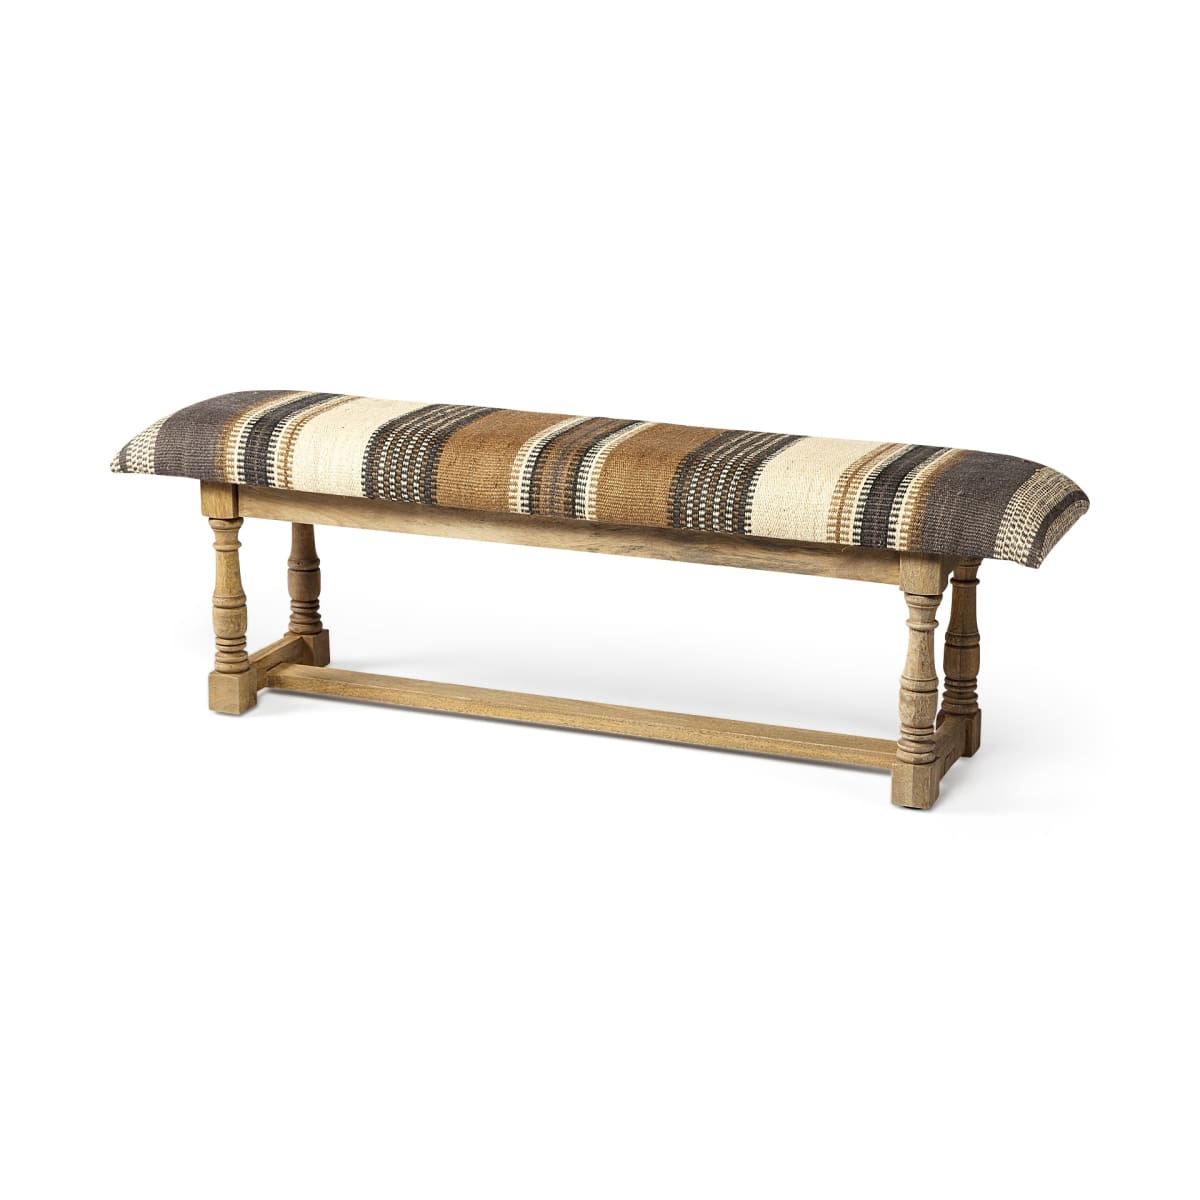 Greenfield Bench Multi Colored Jute | Brown Wood - benches